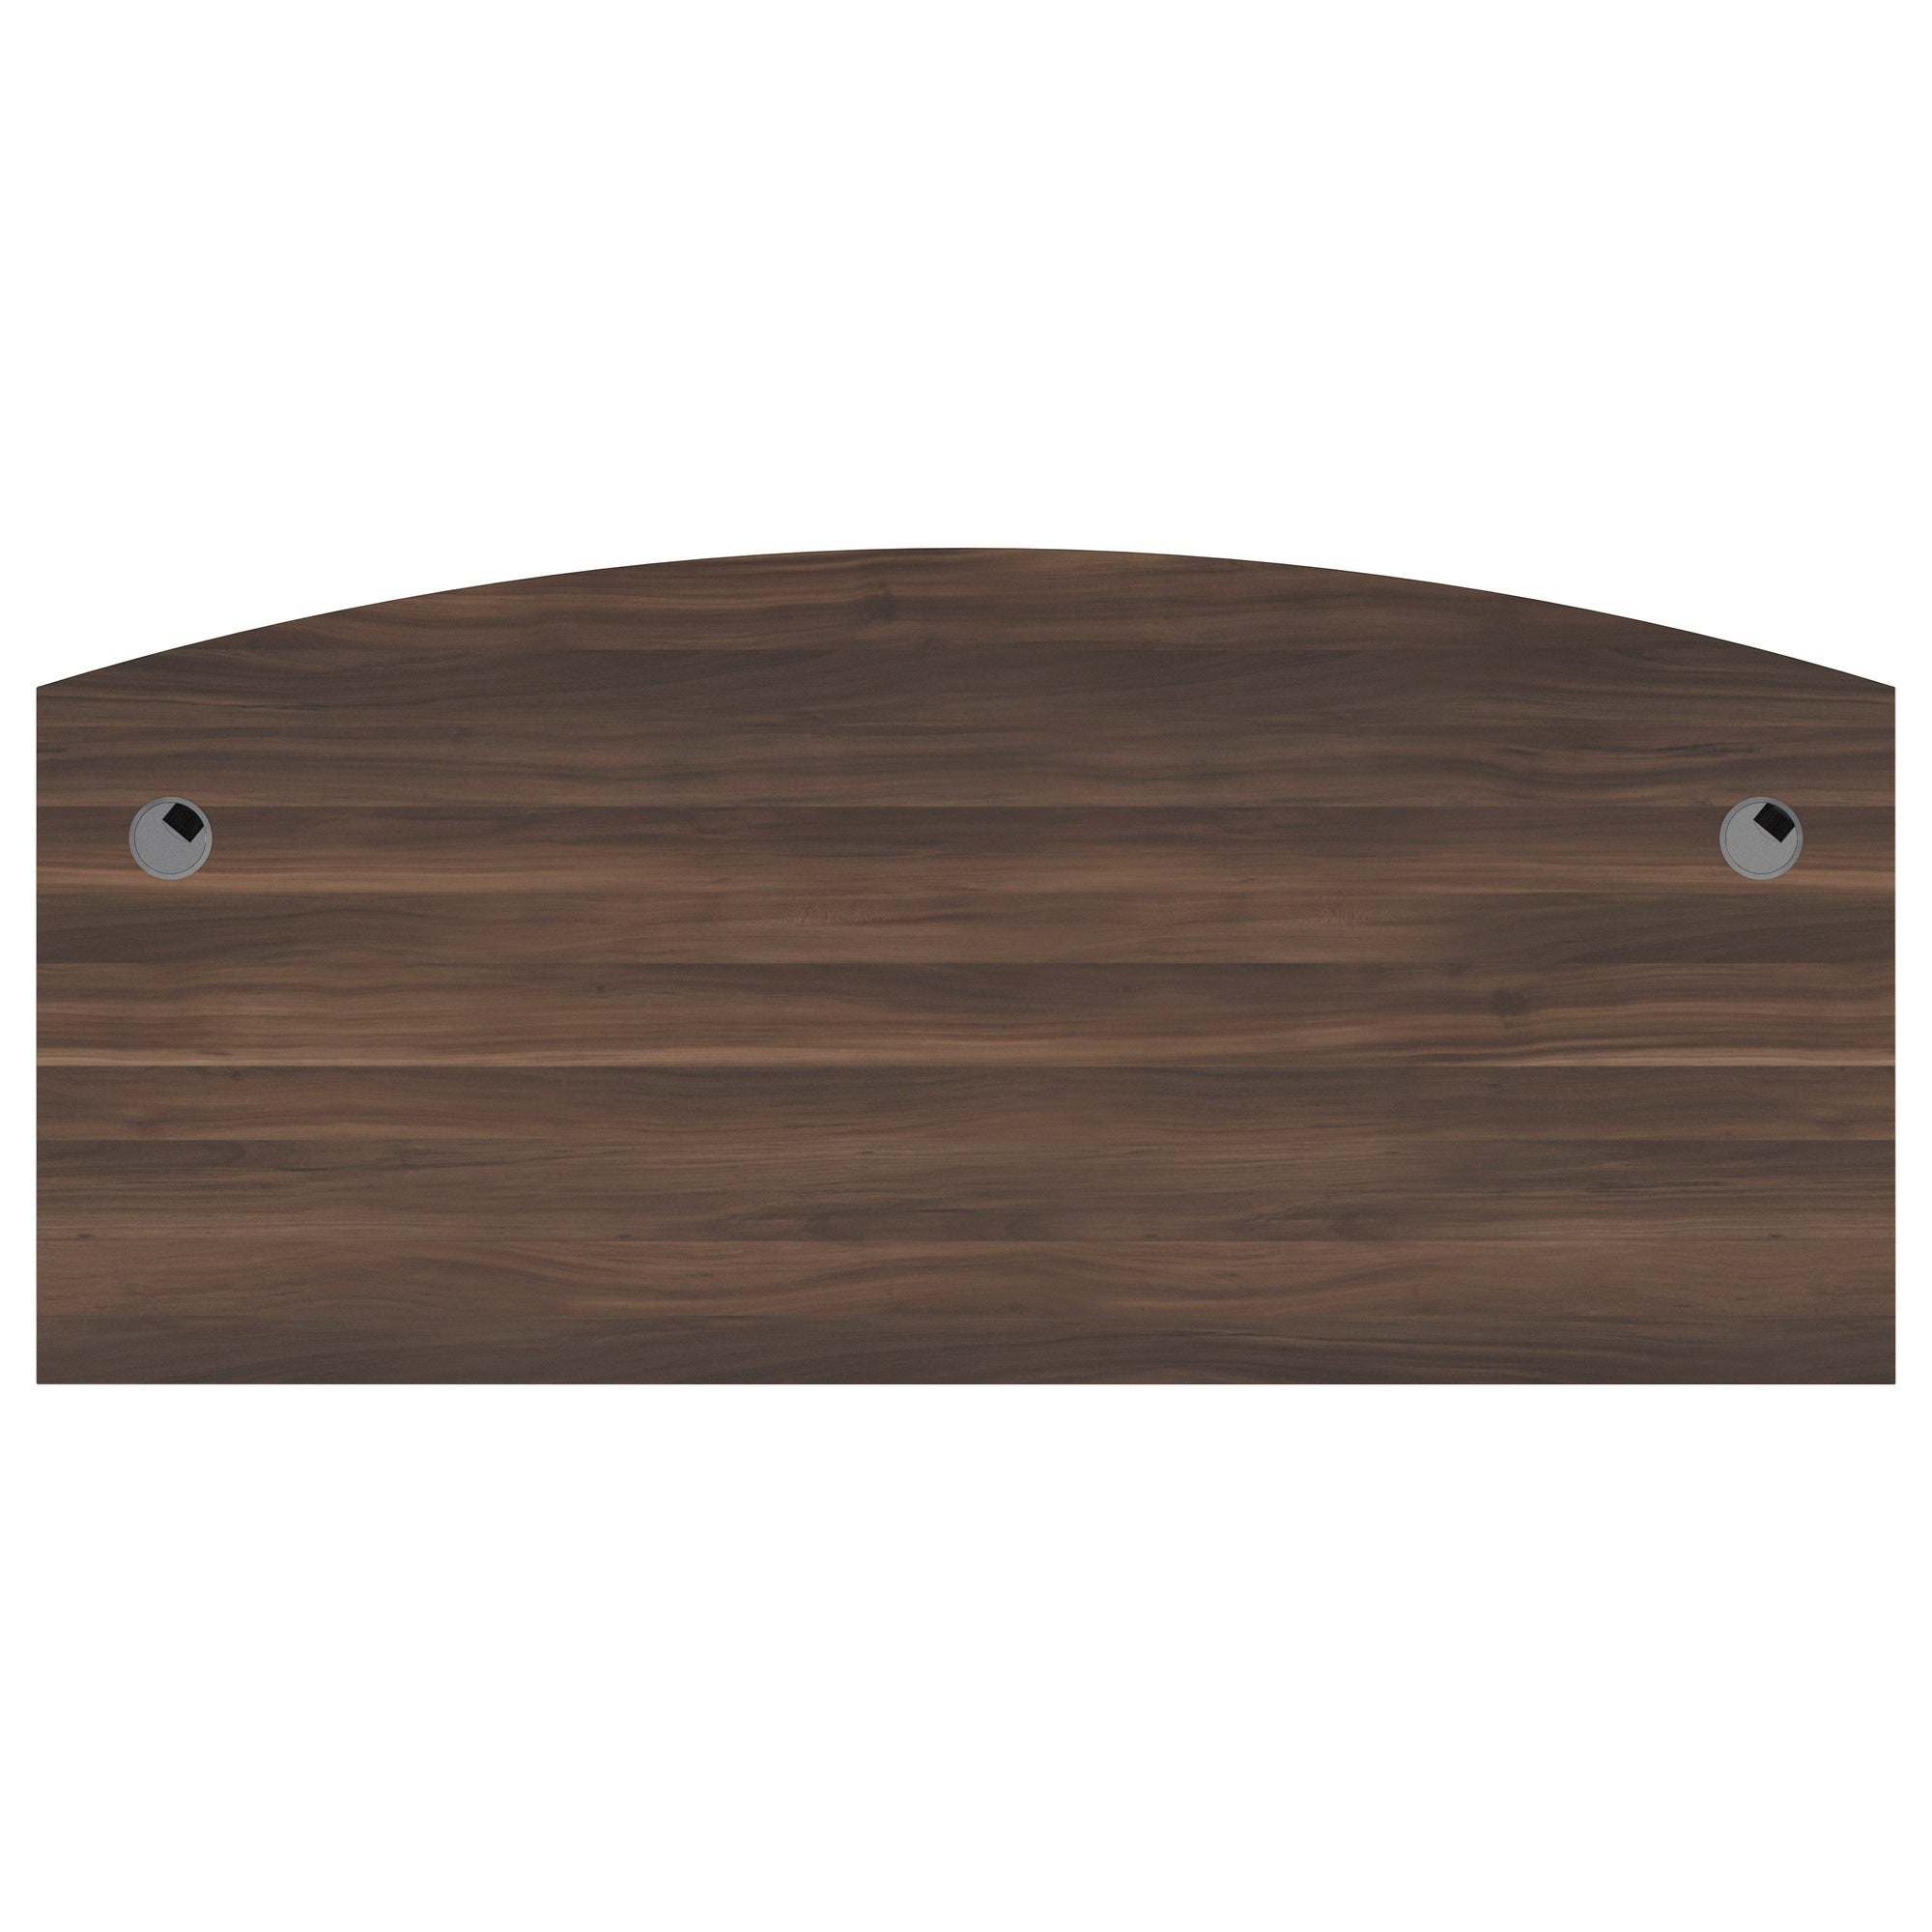 Regent Bow Fronted Executive Desk